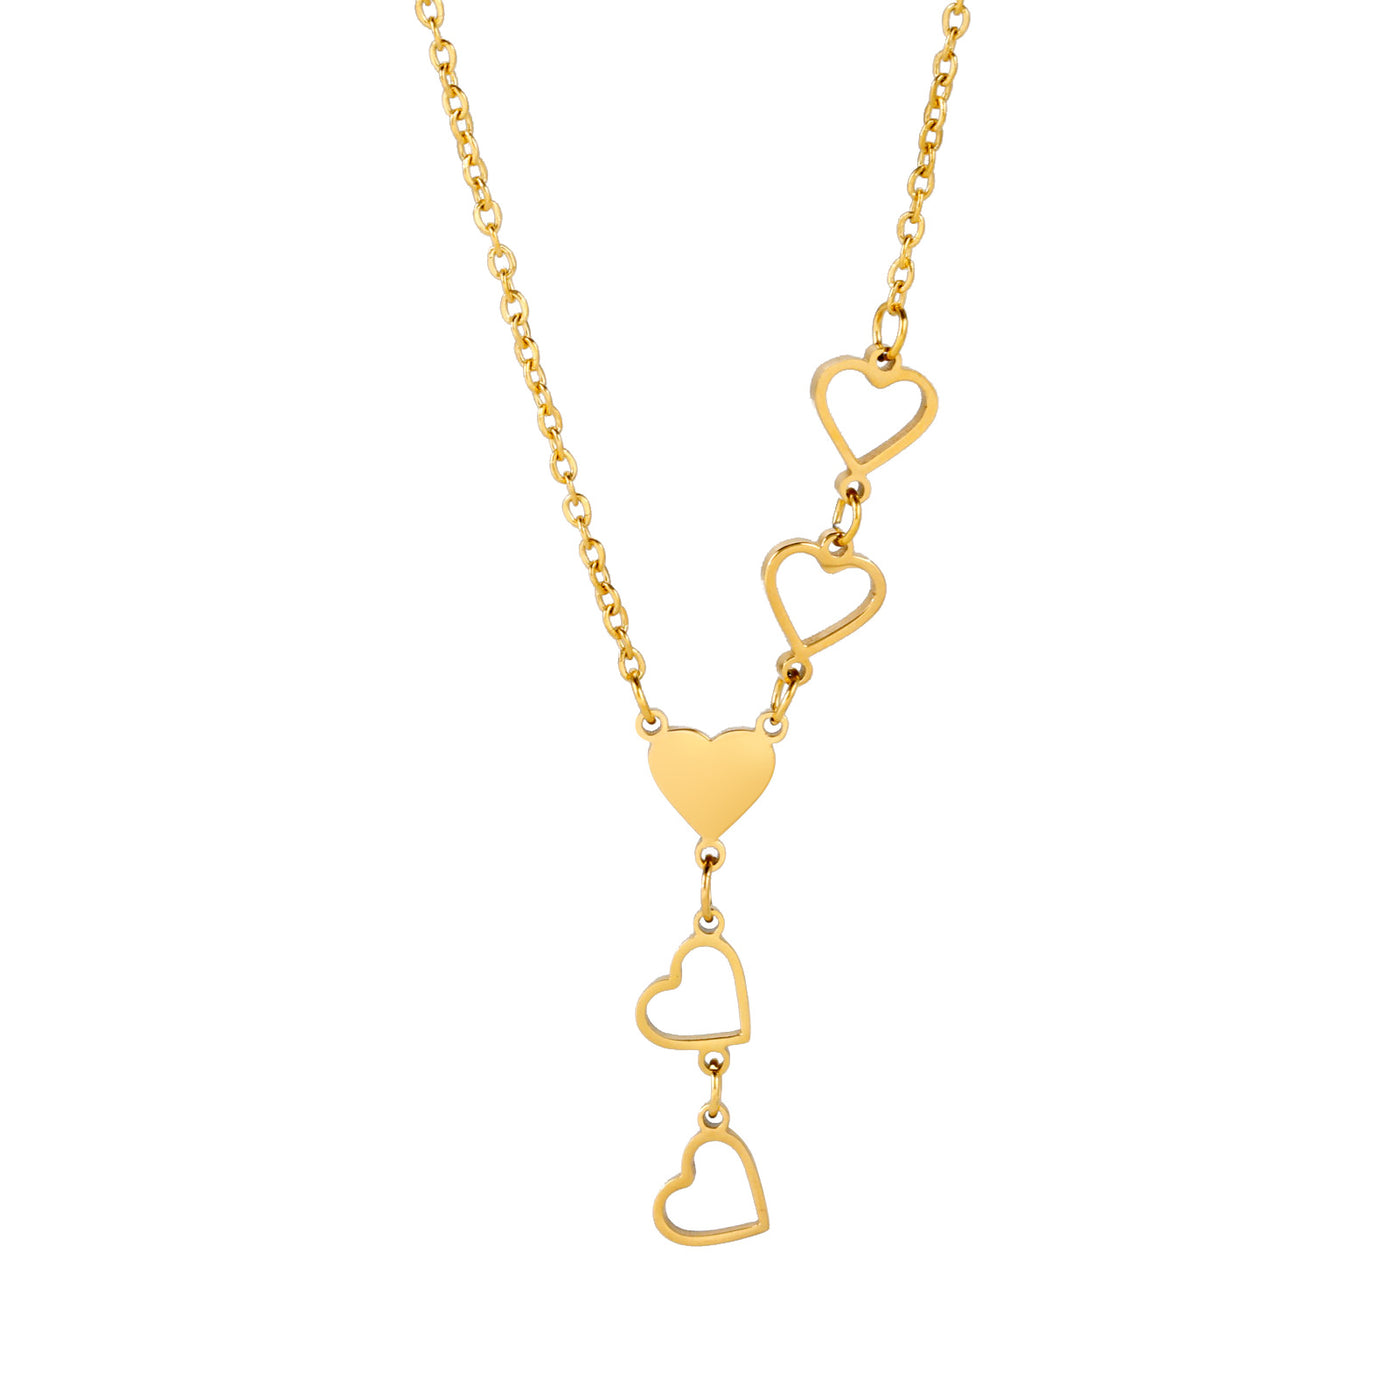 Fashion Love Pendant Stainless Steel Necklace - Gold - Necklaces - Carvan Mart